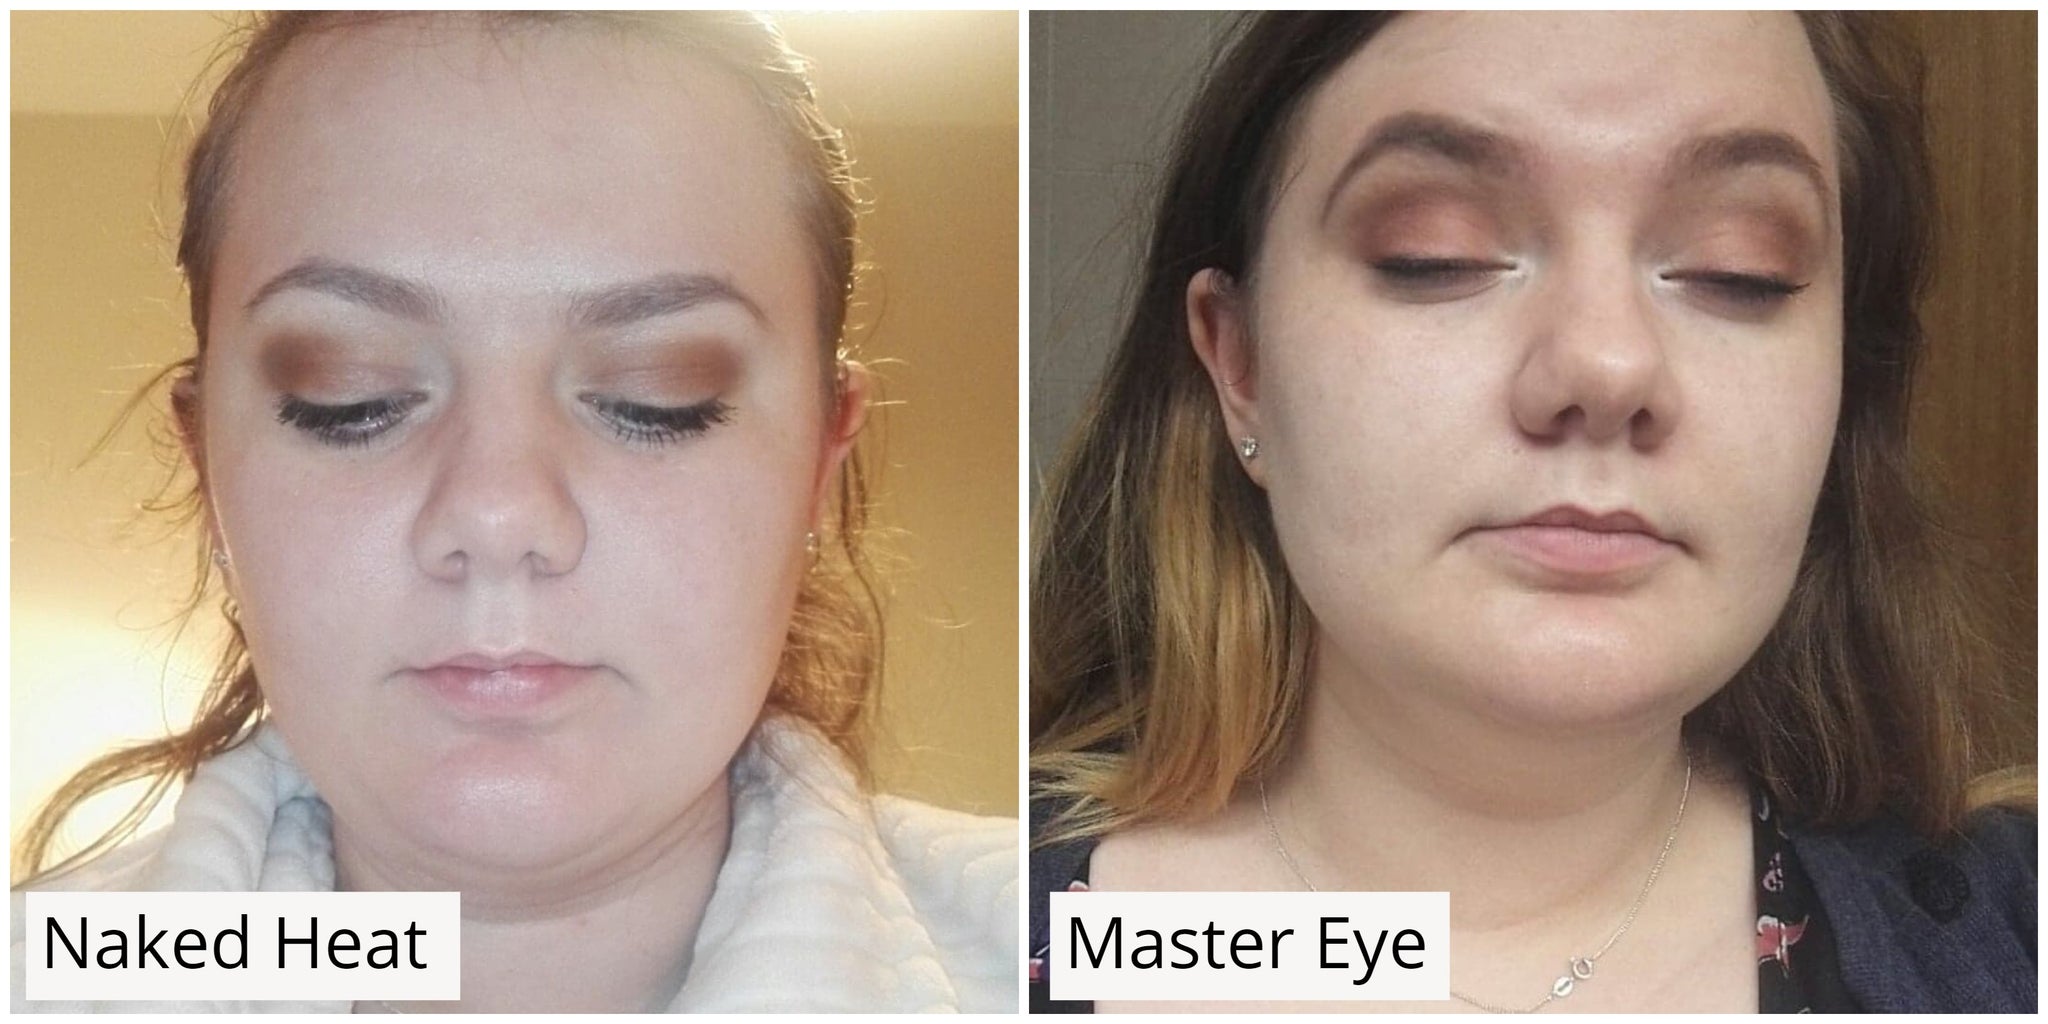 Girl showing eye make up look at end of the day